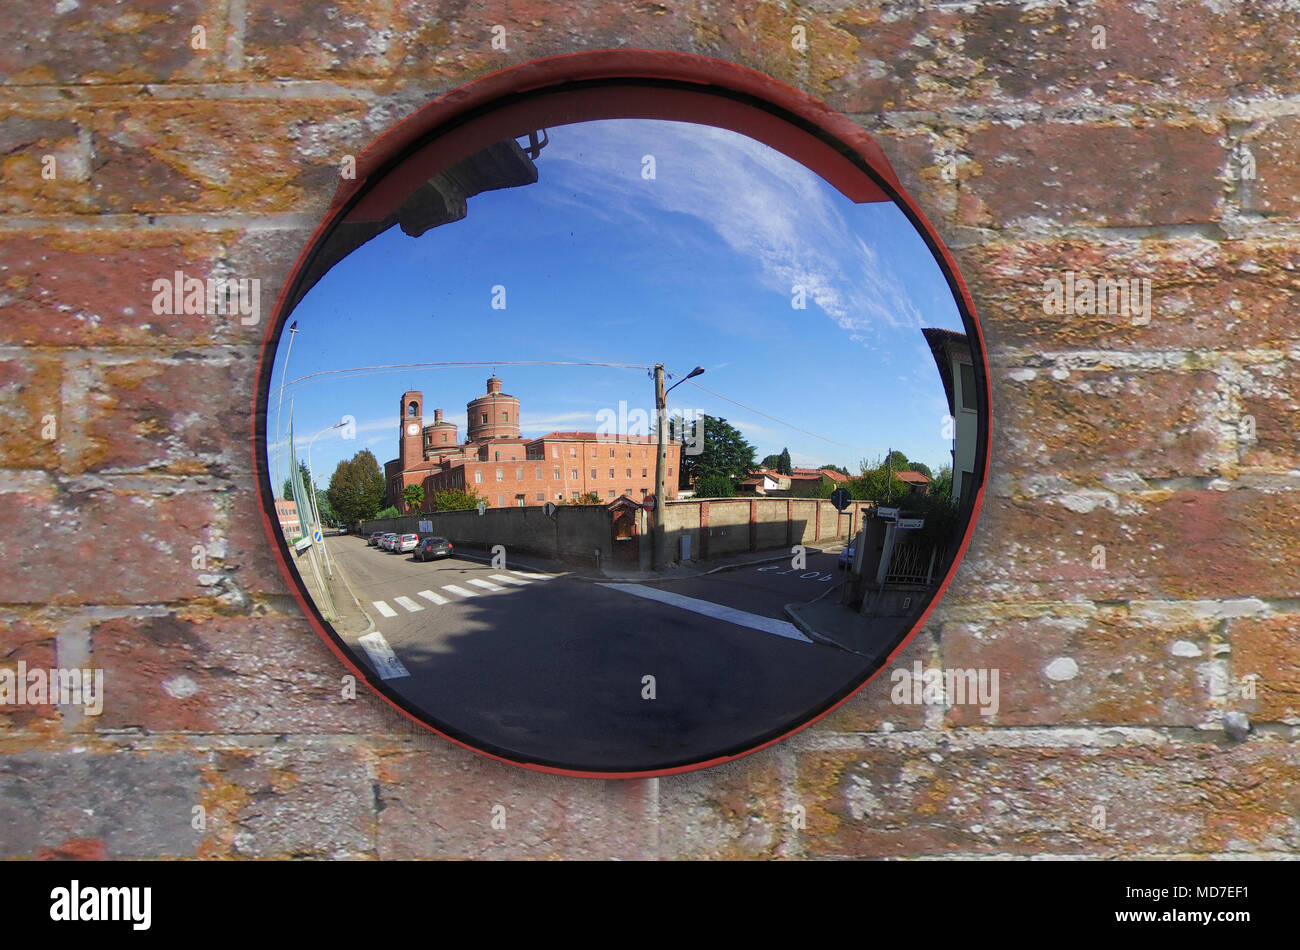 church reflected in a mirror placed at an intersection on an old brick wall in a town near Milan, Italy Stock Photo